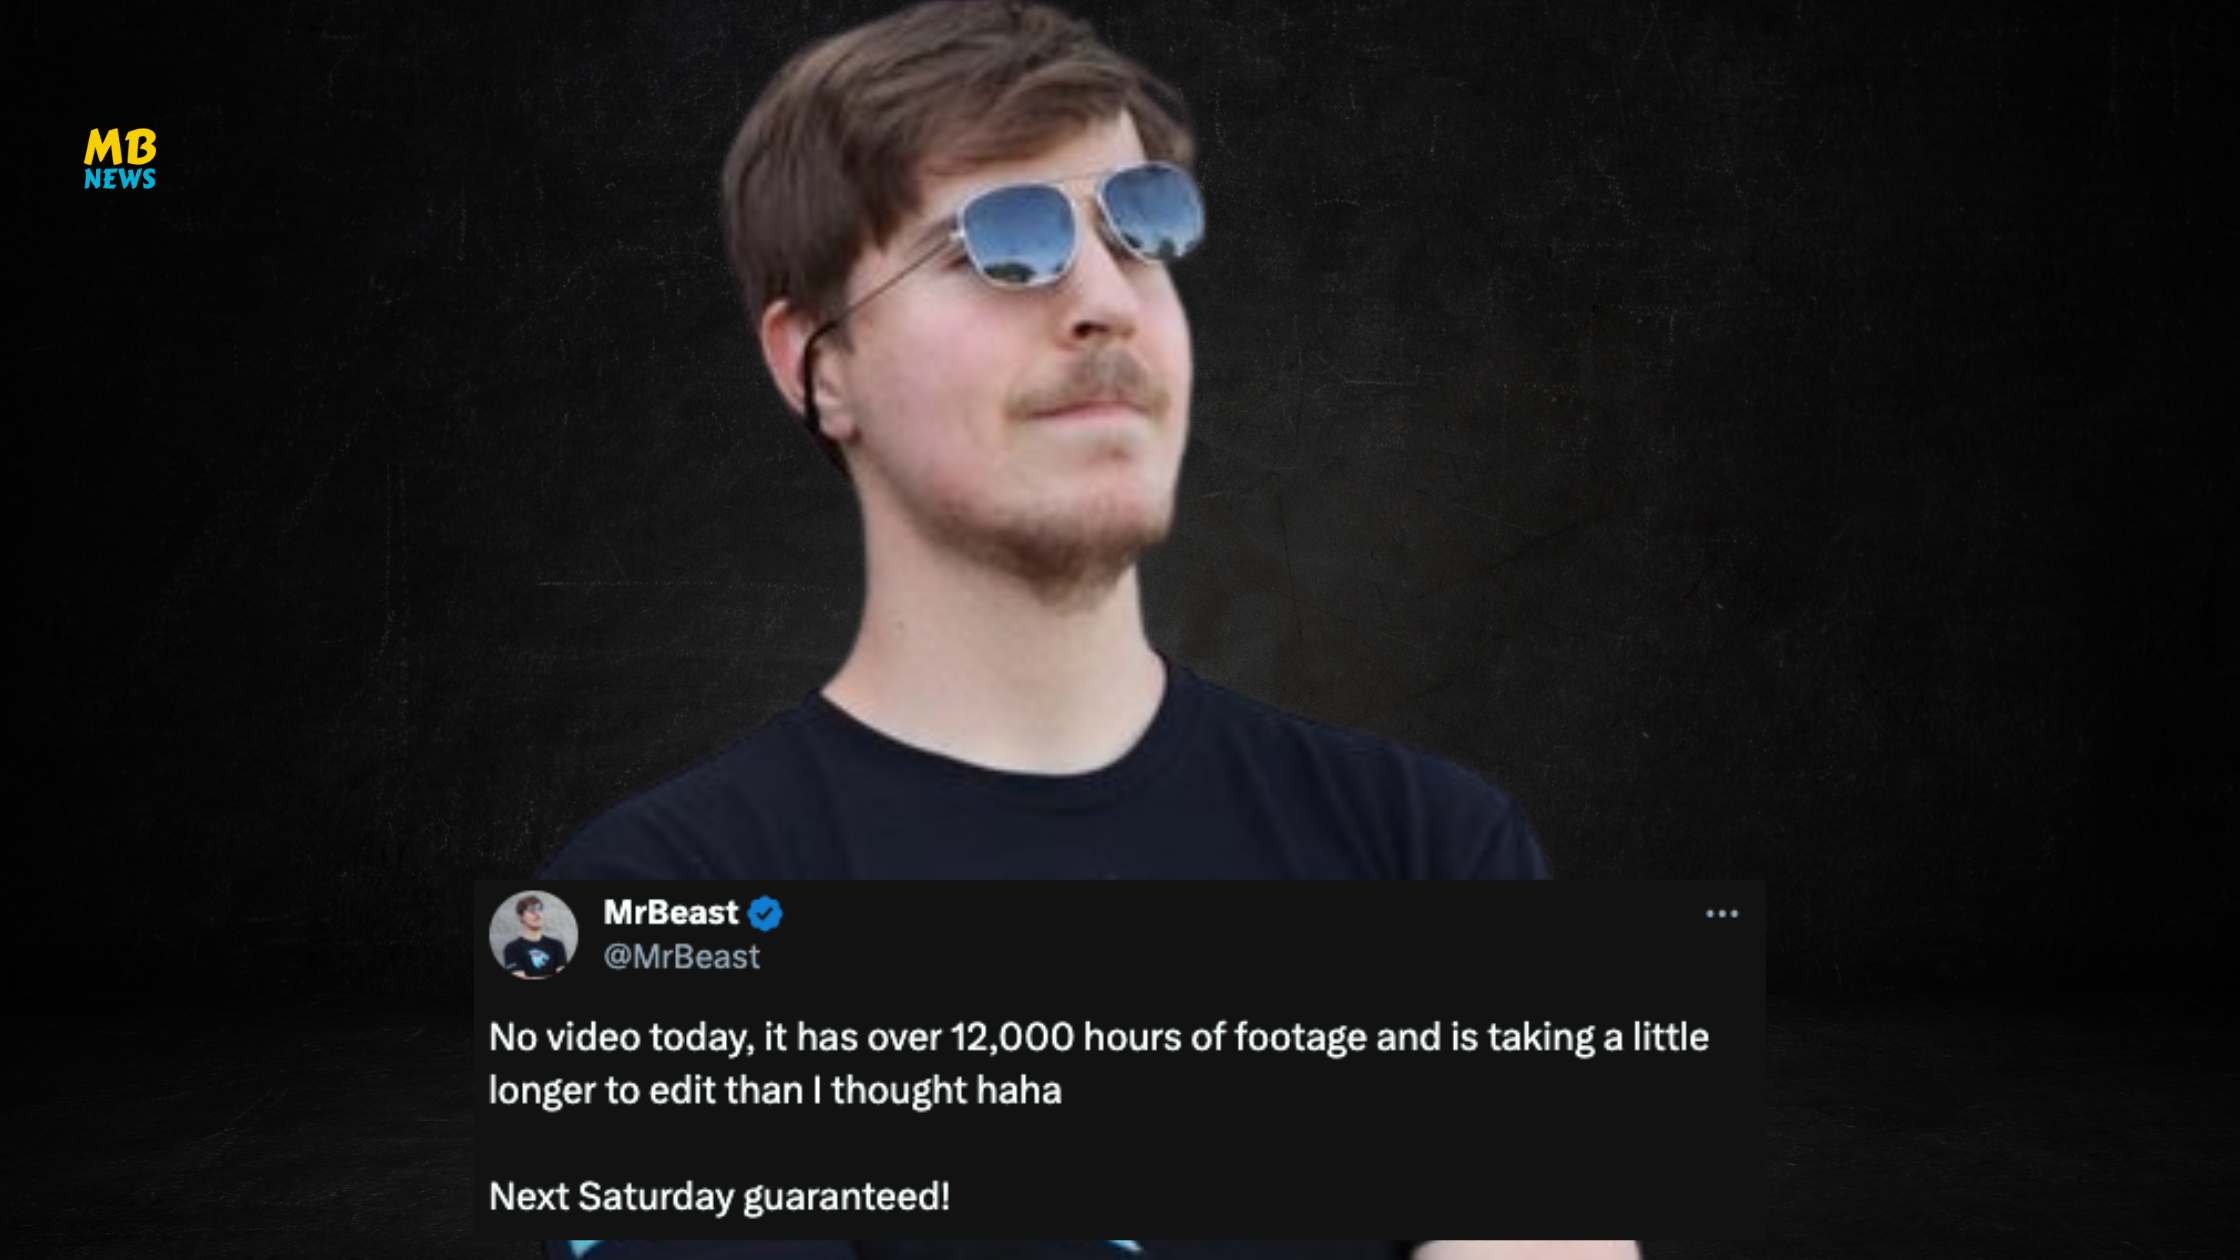 MrBeast's Saturday Video Delayed Due to 12,000 Hours of Footage: 'Next Saturday guaranteed'